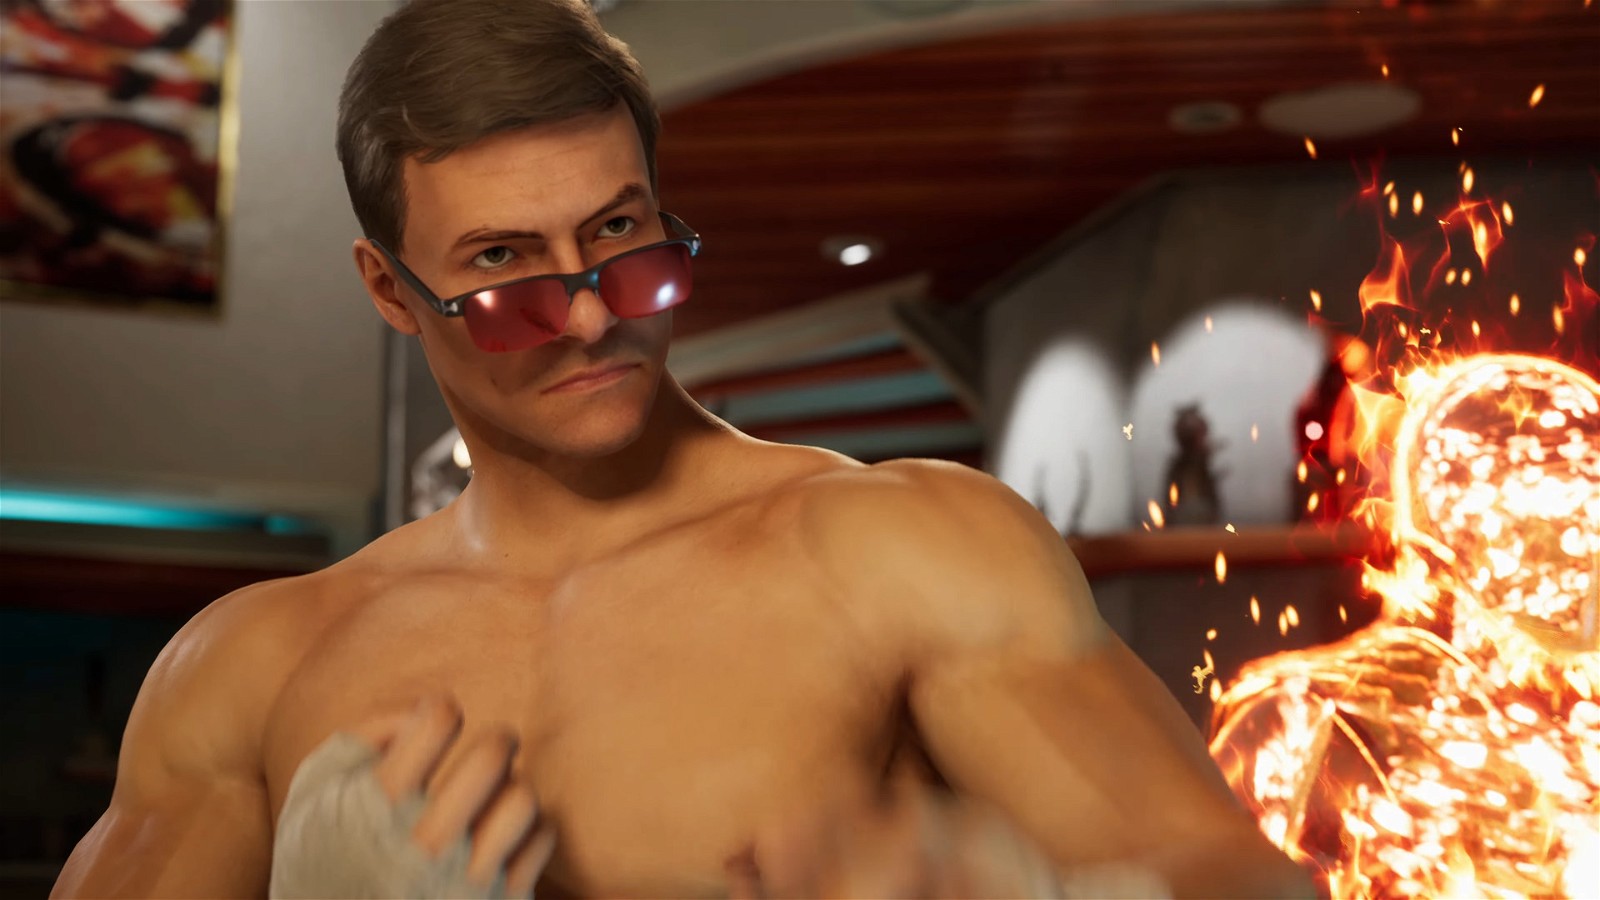 Jean-Claude Van Damme Makes His Appearance As A Johnny Cage Skin